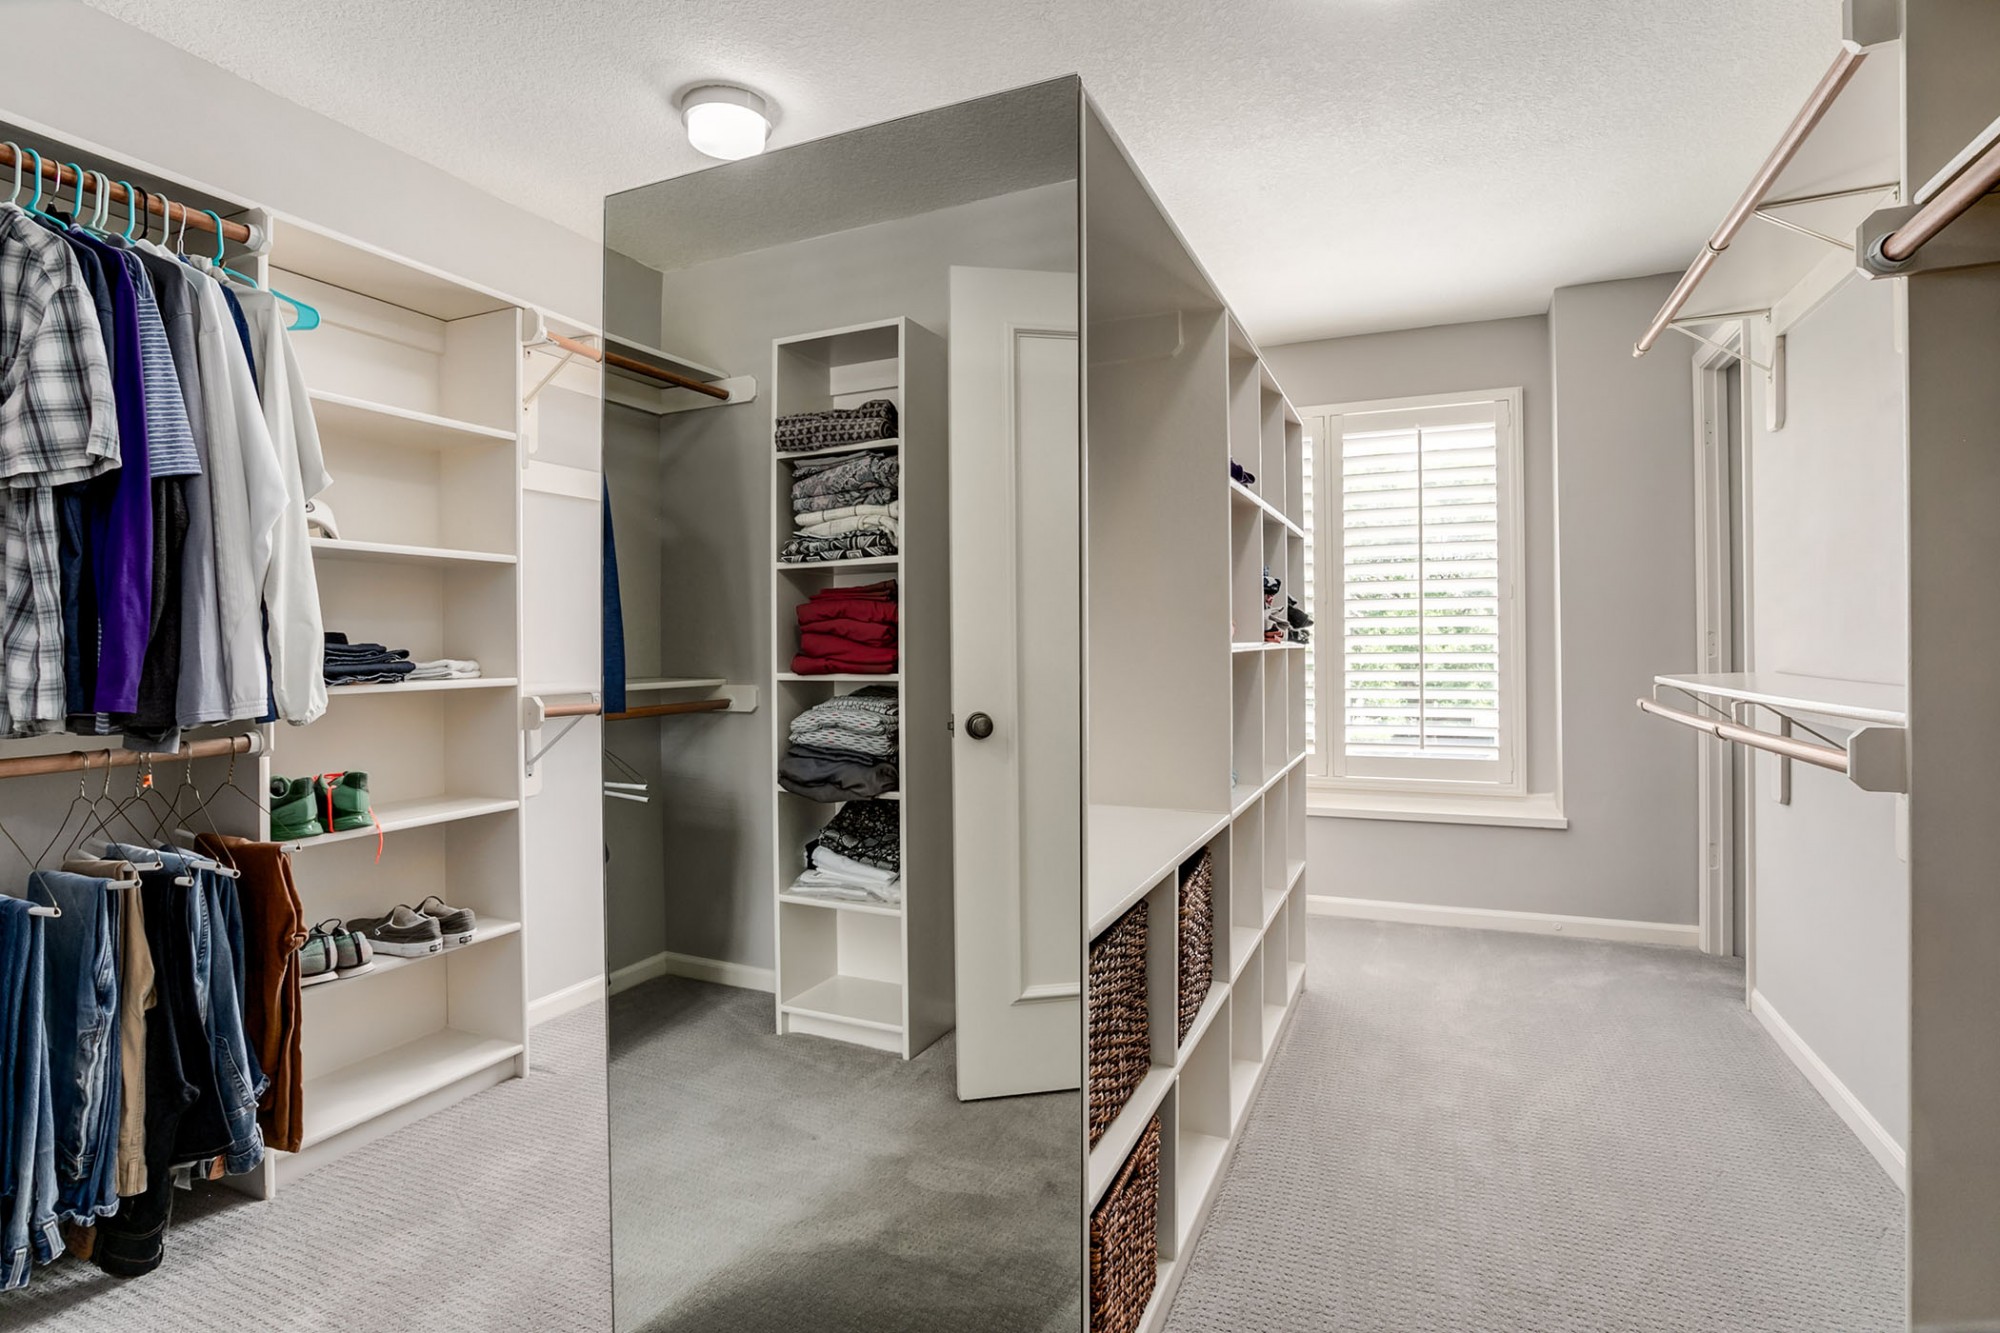 This is one of four master closet spaces! This is the main room, plus there's a closet with cedar wall and two additional closets!